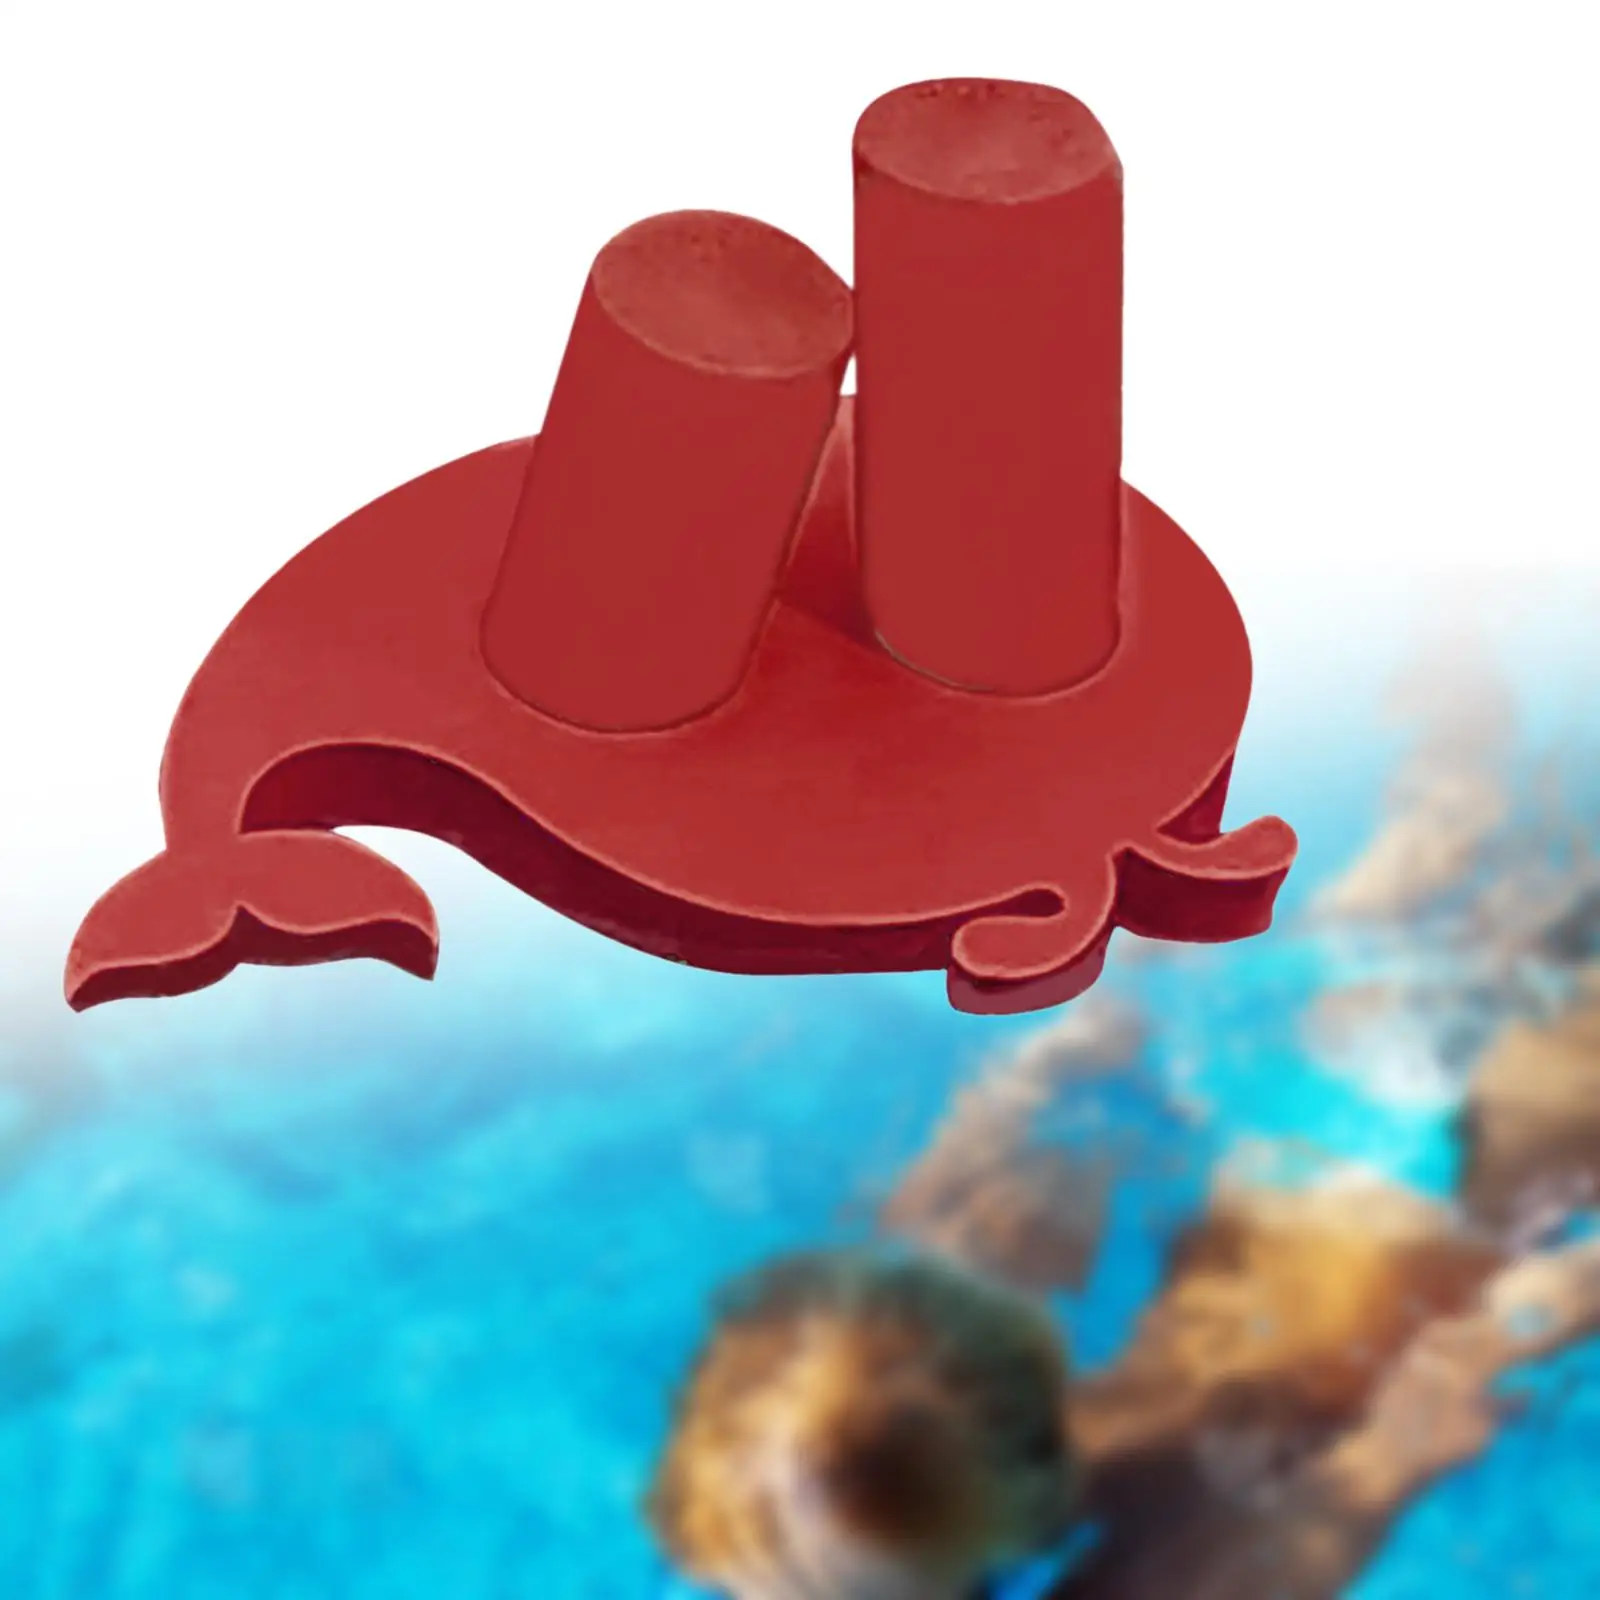 Swim Noodles Connector Holder Joint Holed for Water Toy Rafts Swimming Chair